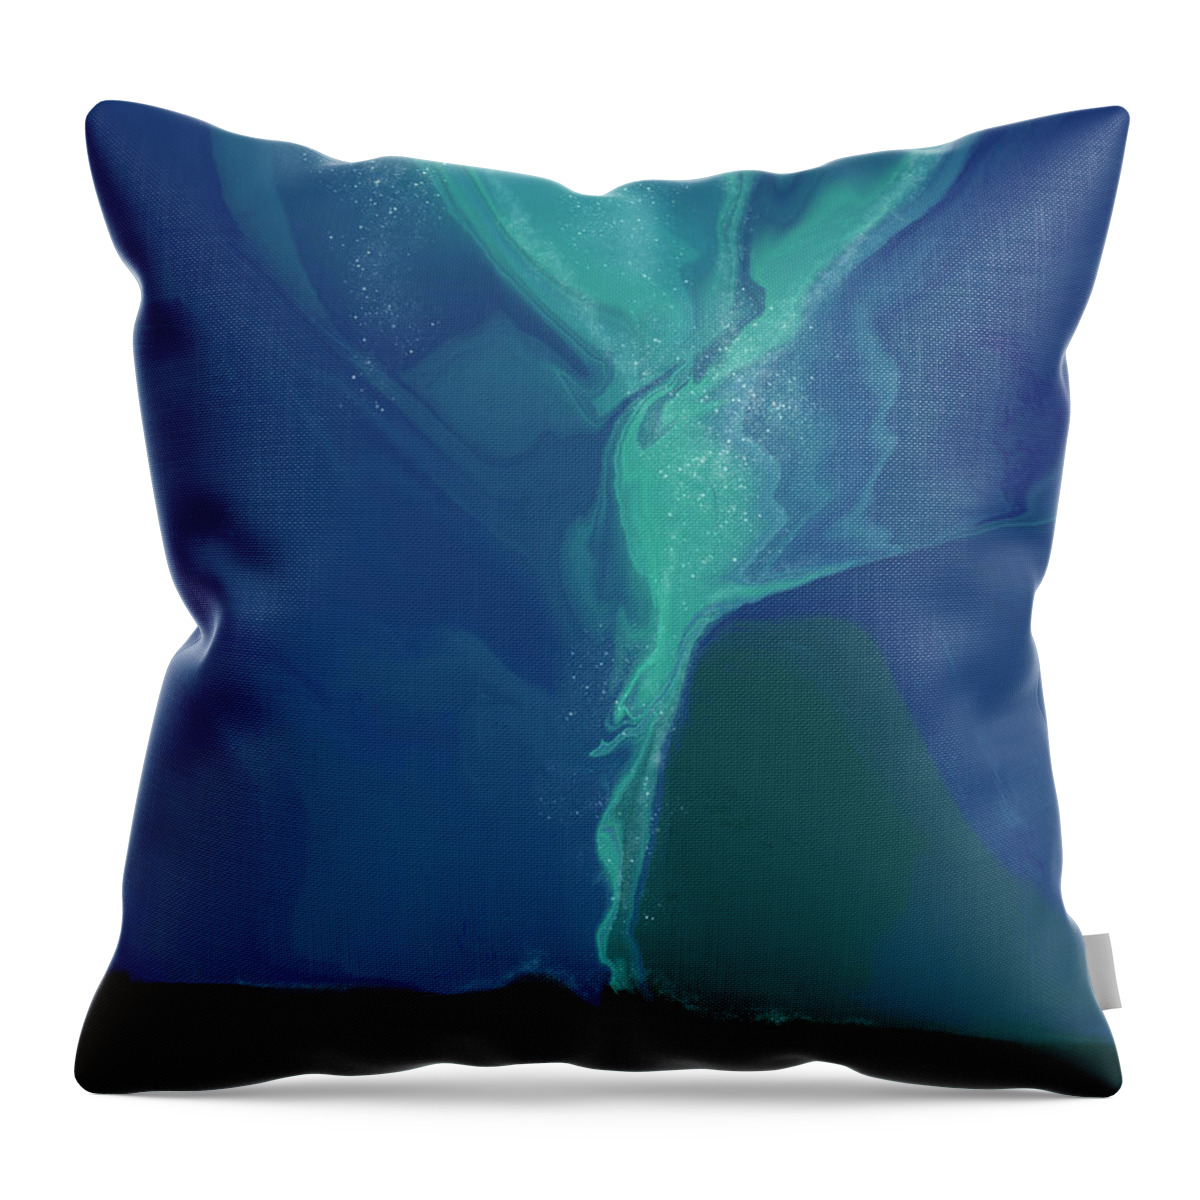 Northern Lights Throw Pillow featuring the digital art Northern Lights Abstract - 2 - Blue - Contemporary Painting by Studio Grafiikka